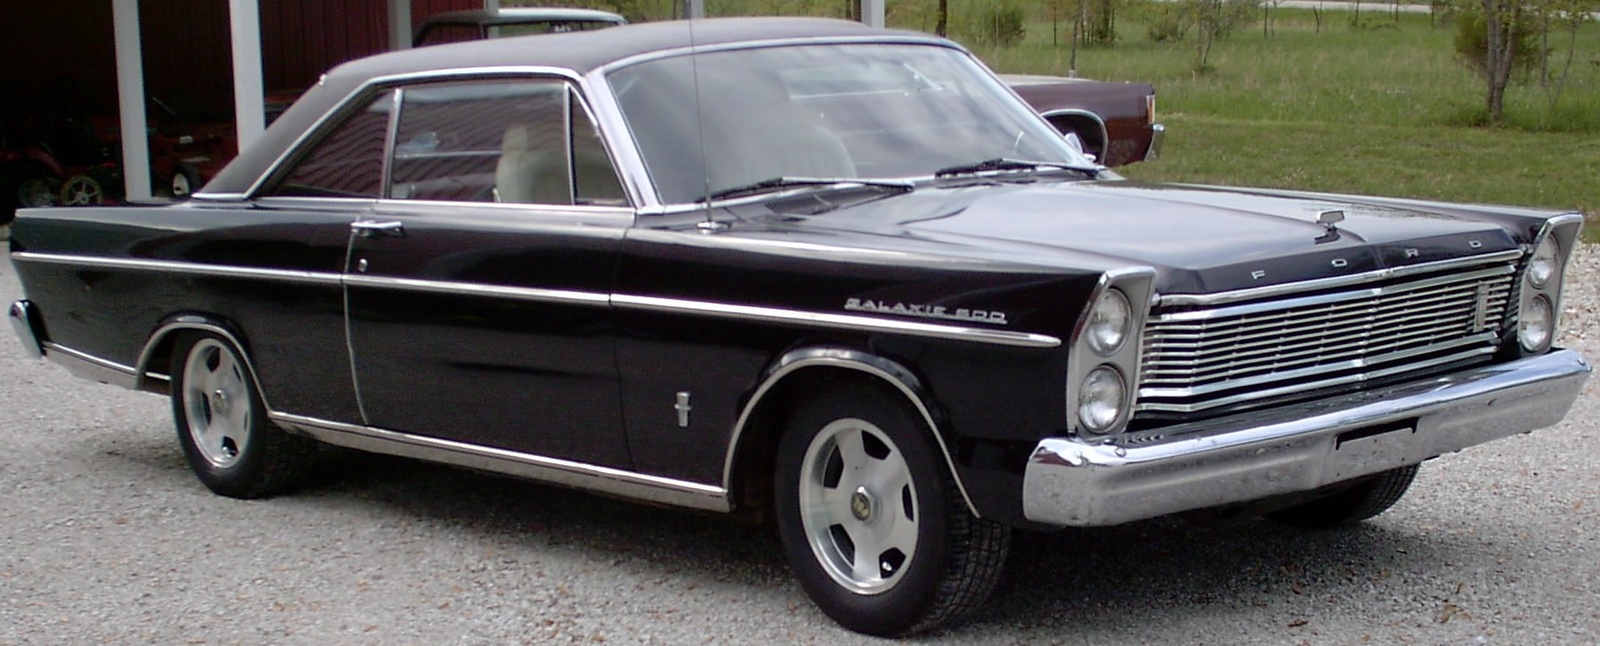 1965 Ford galaxy picture #5